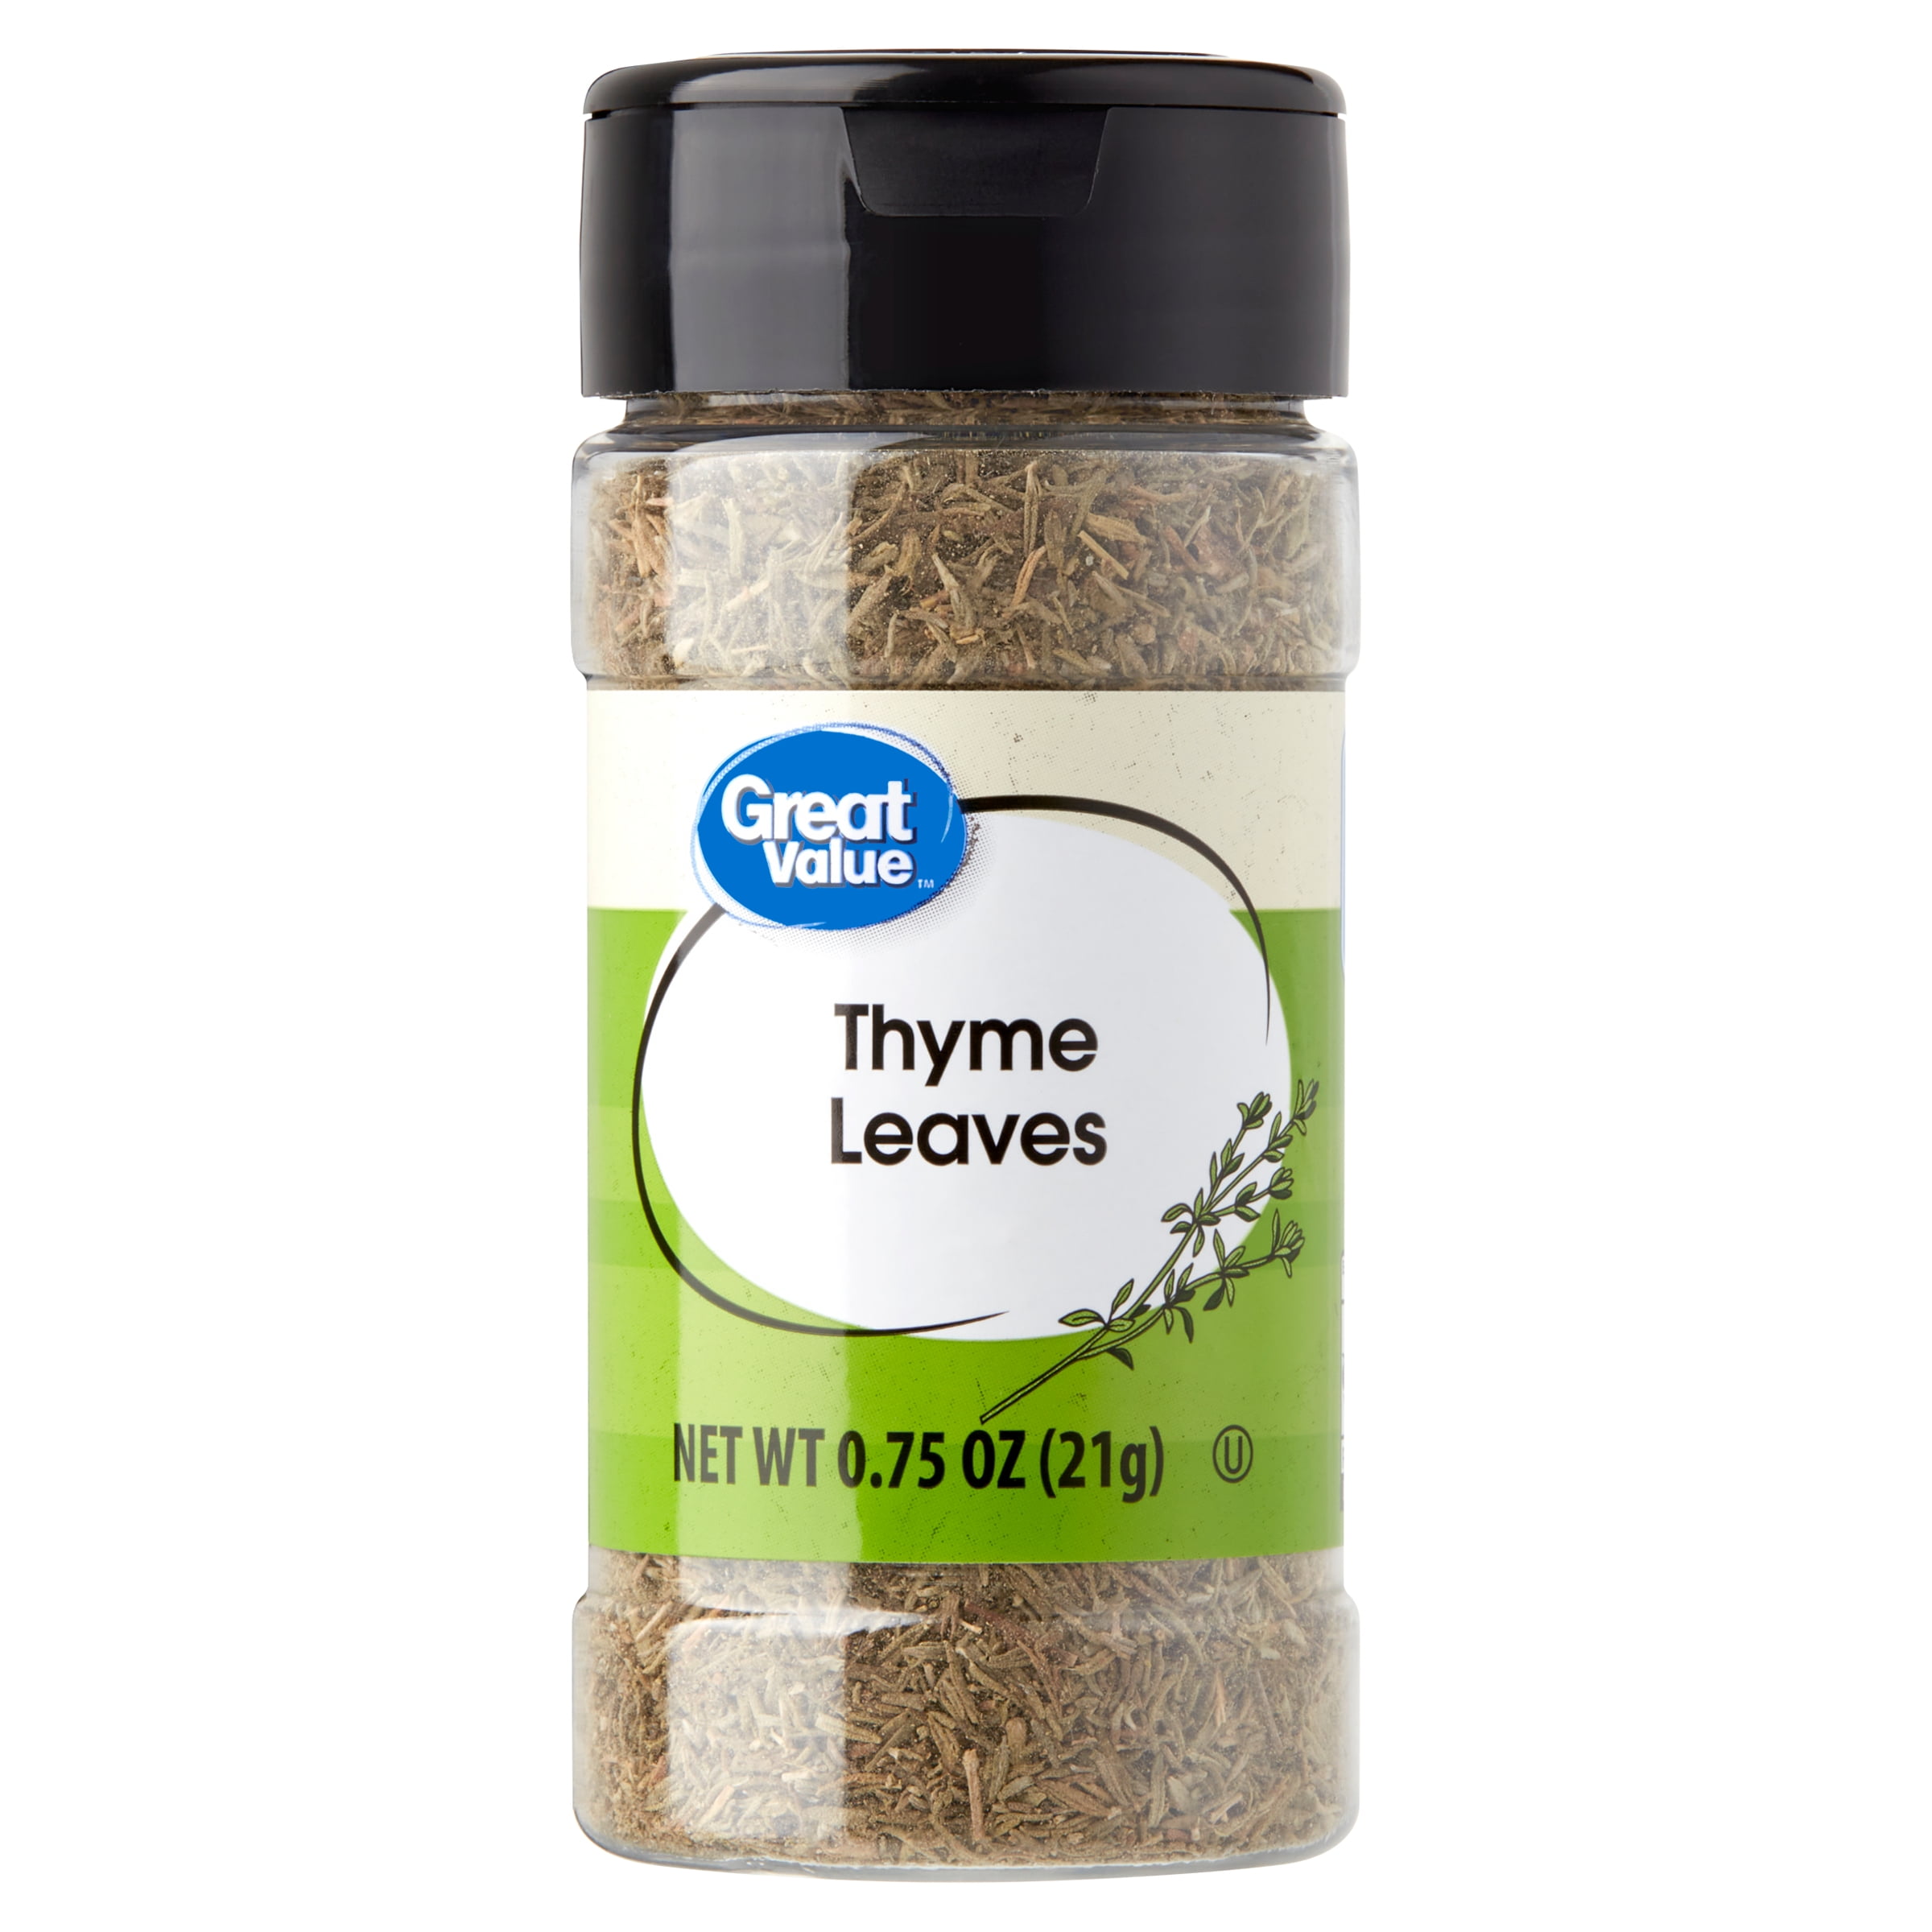 Great Value Thyme Leaves, 0.75 oz